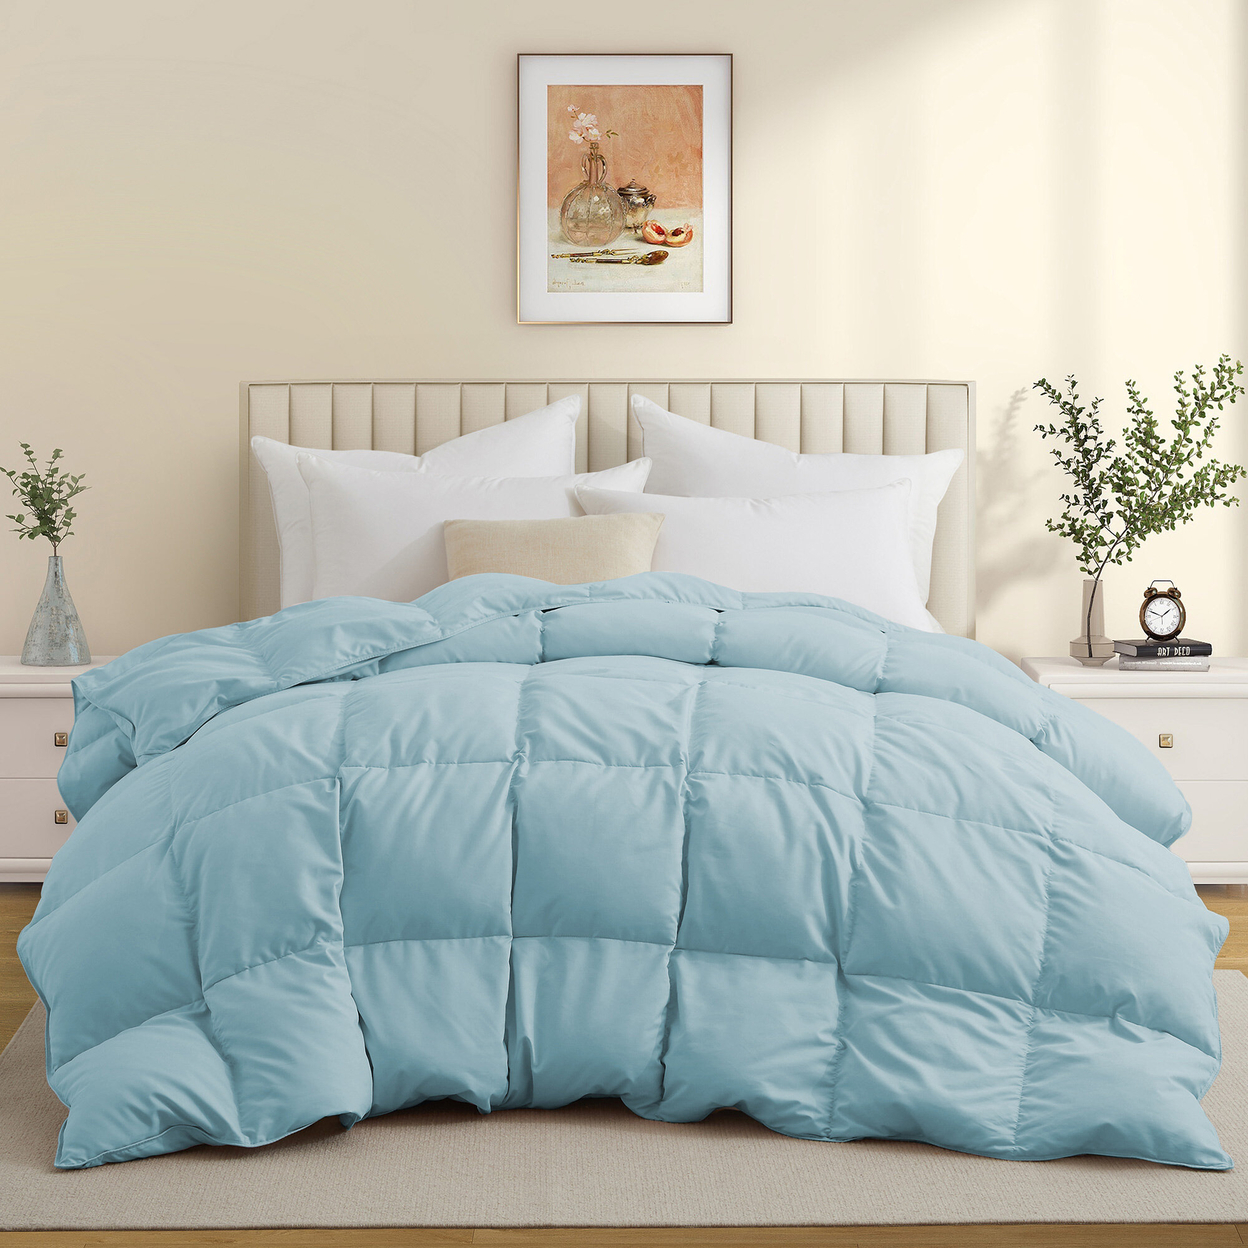 Premium All Seasons White Goose Feather Fiber And Down Comforter - Winter Sky, King